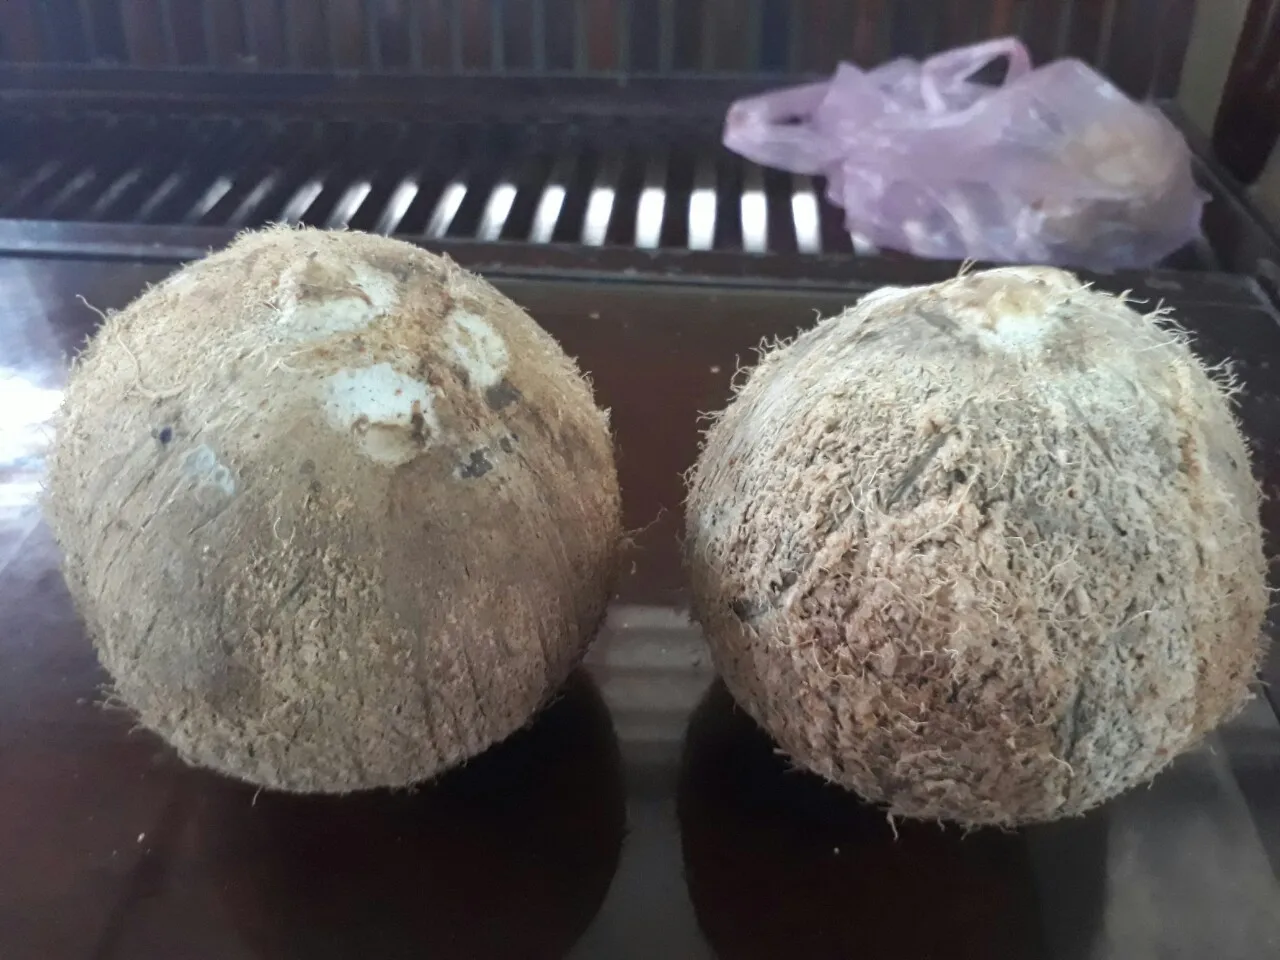 Old Coconut,Matured Coconut +84963818434 Whatsapp - Buy Old Coconut ...